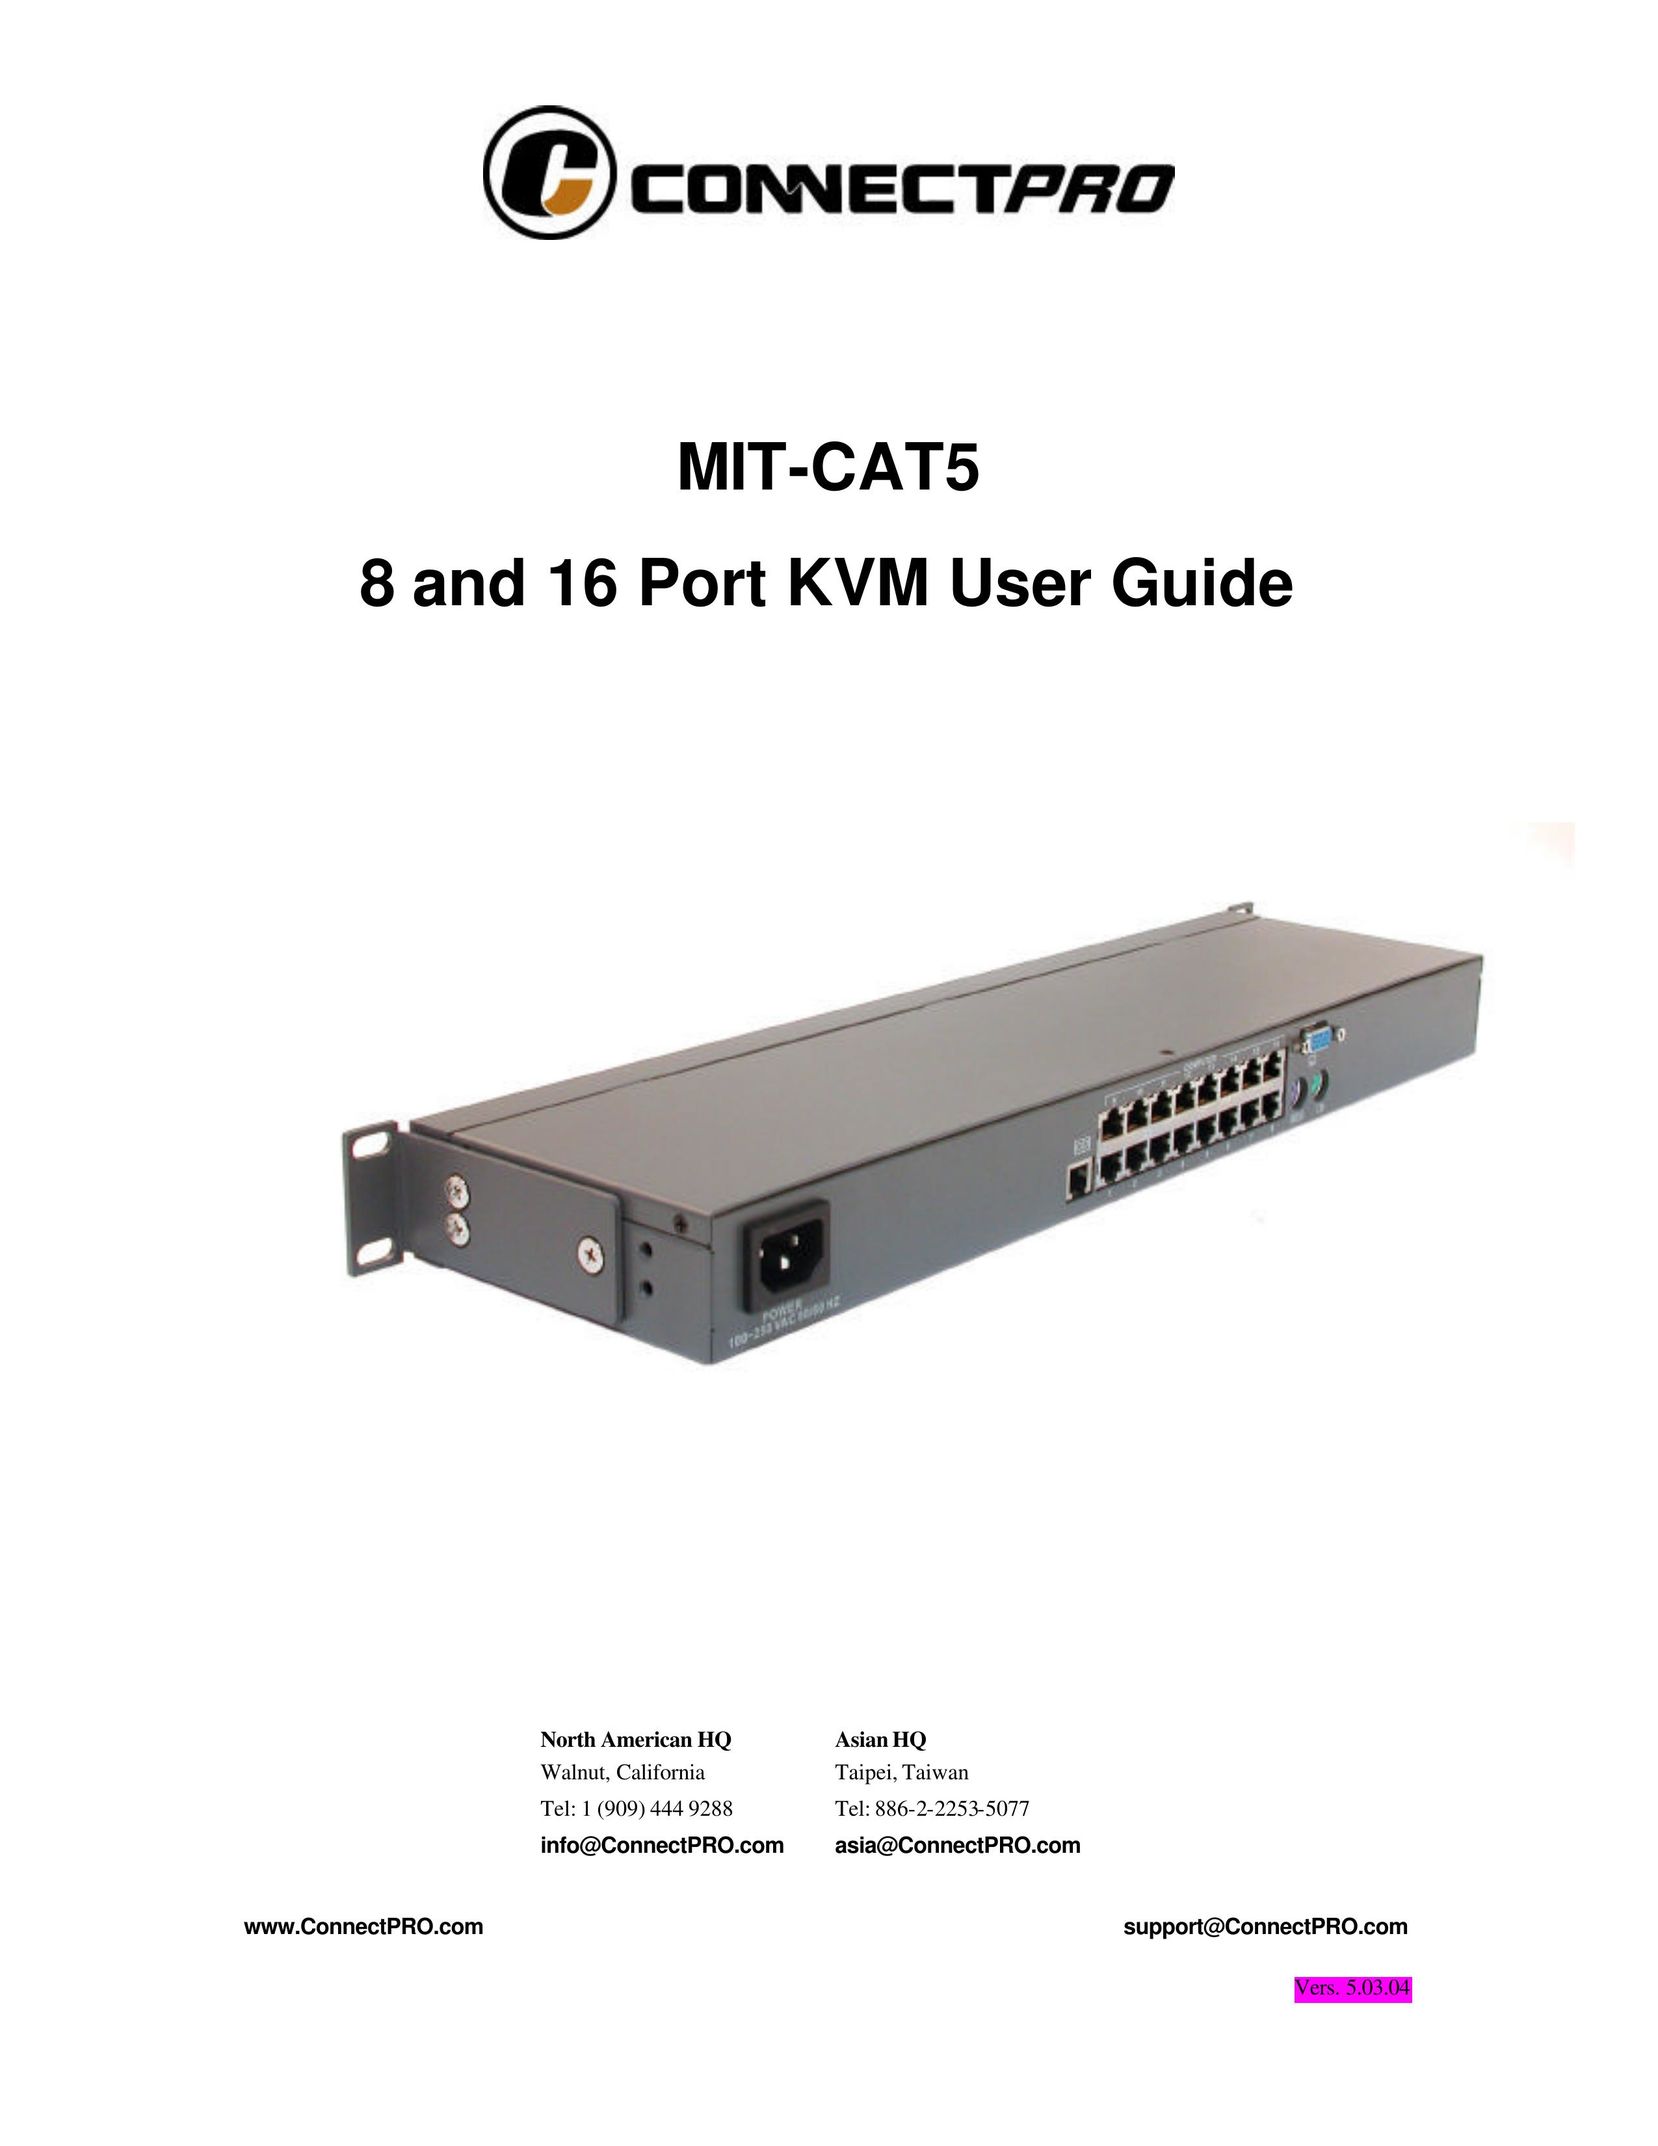 ConnectPRO MIT-CAT5 8 Computer Monitor User Manual